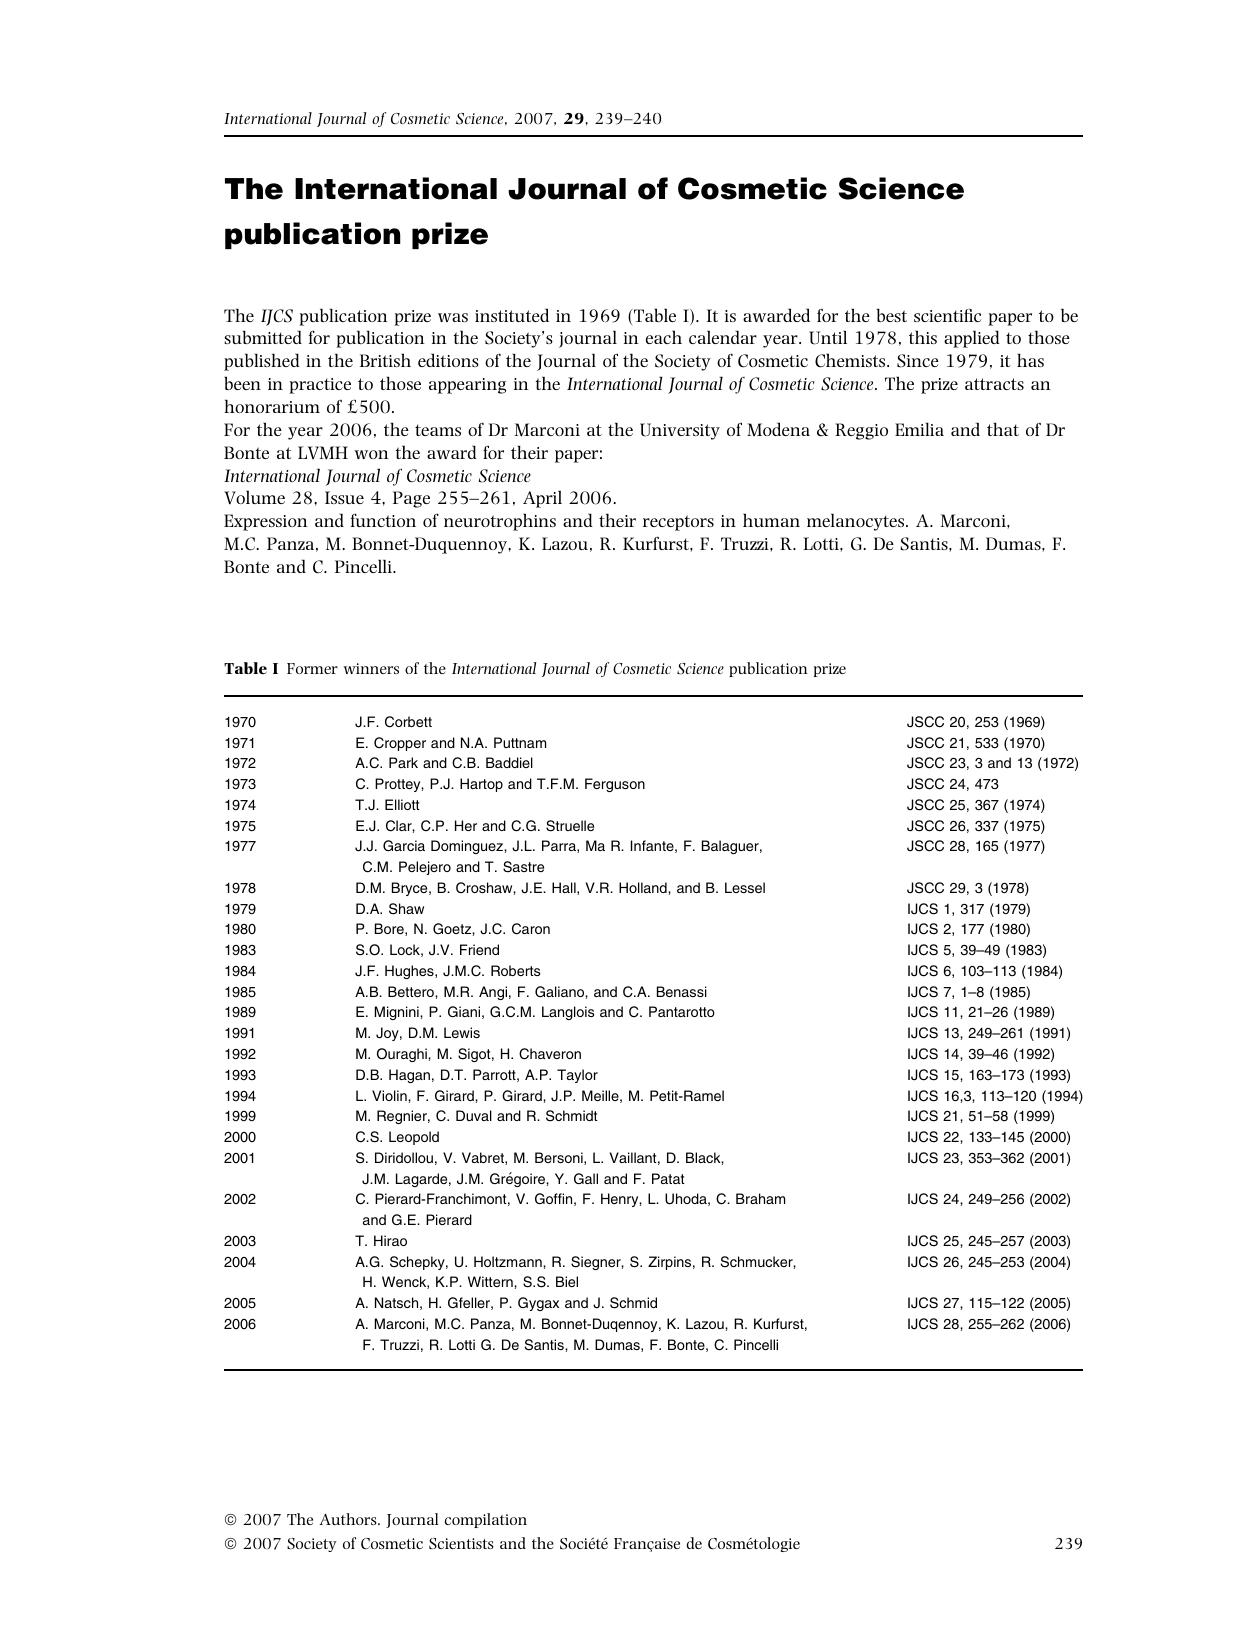 The International Journal of Cosmetic Science publication prize by Unknown